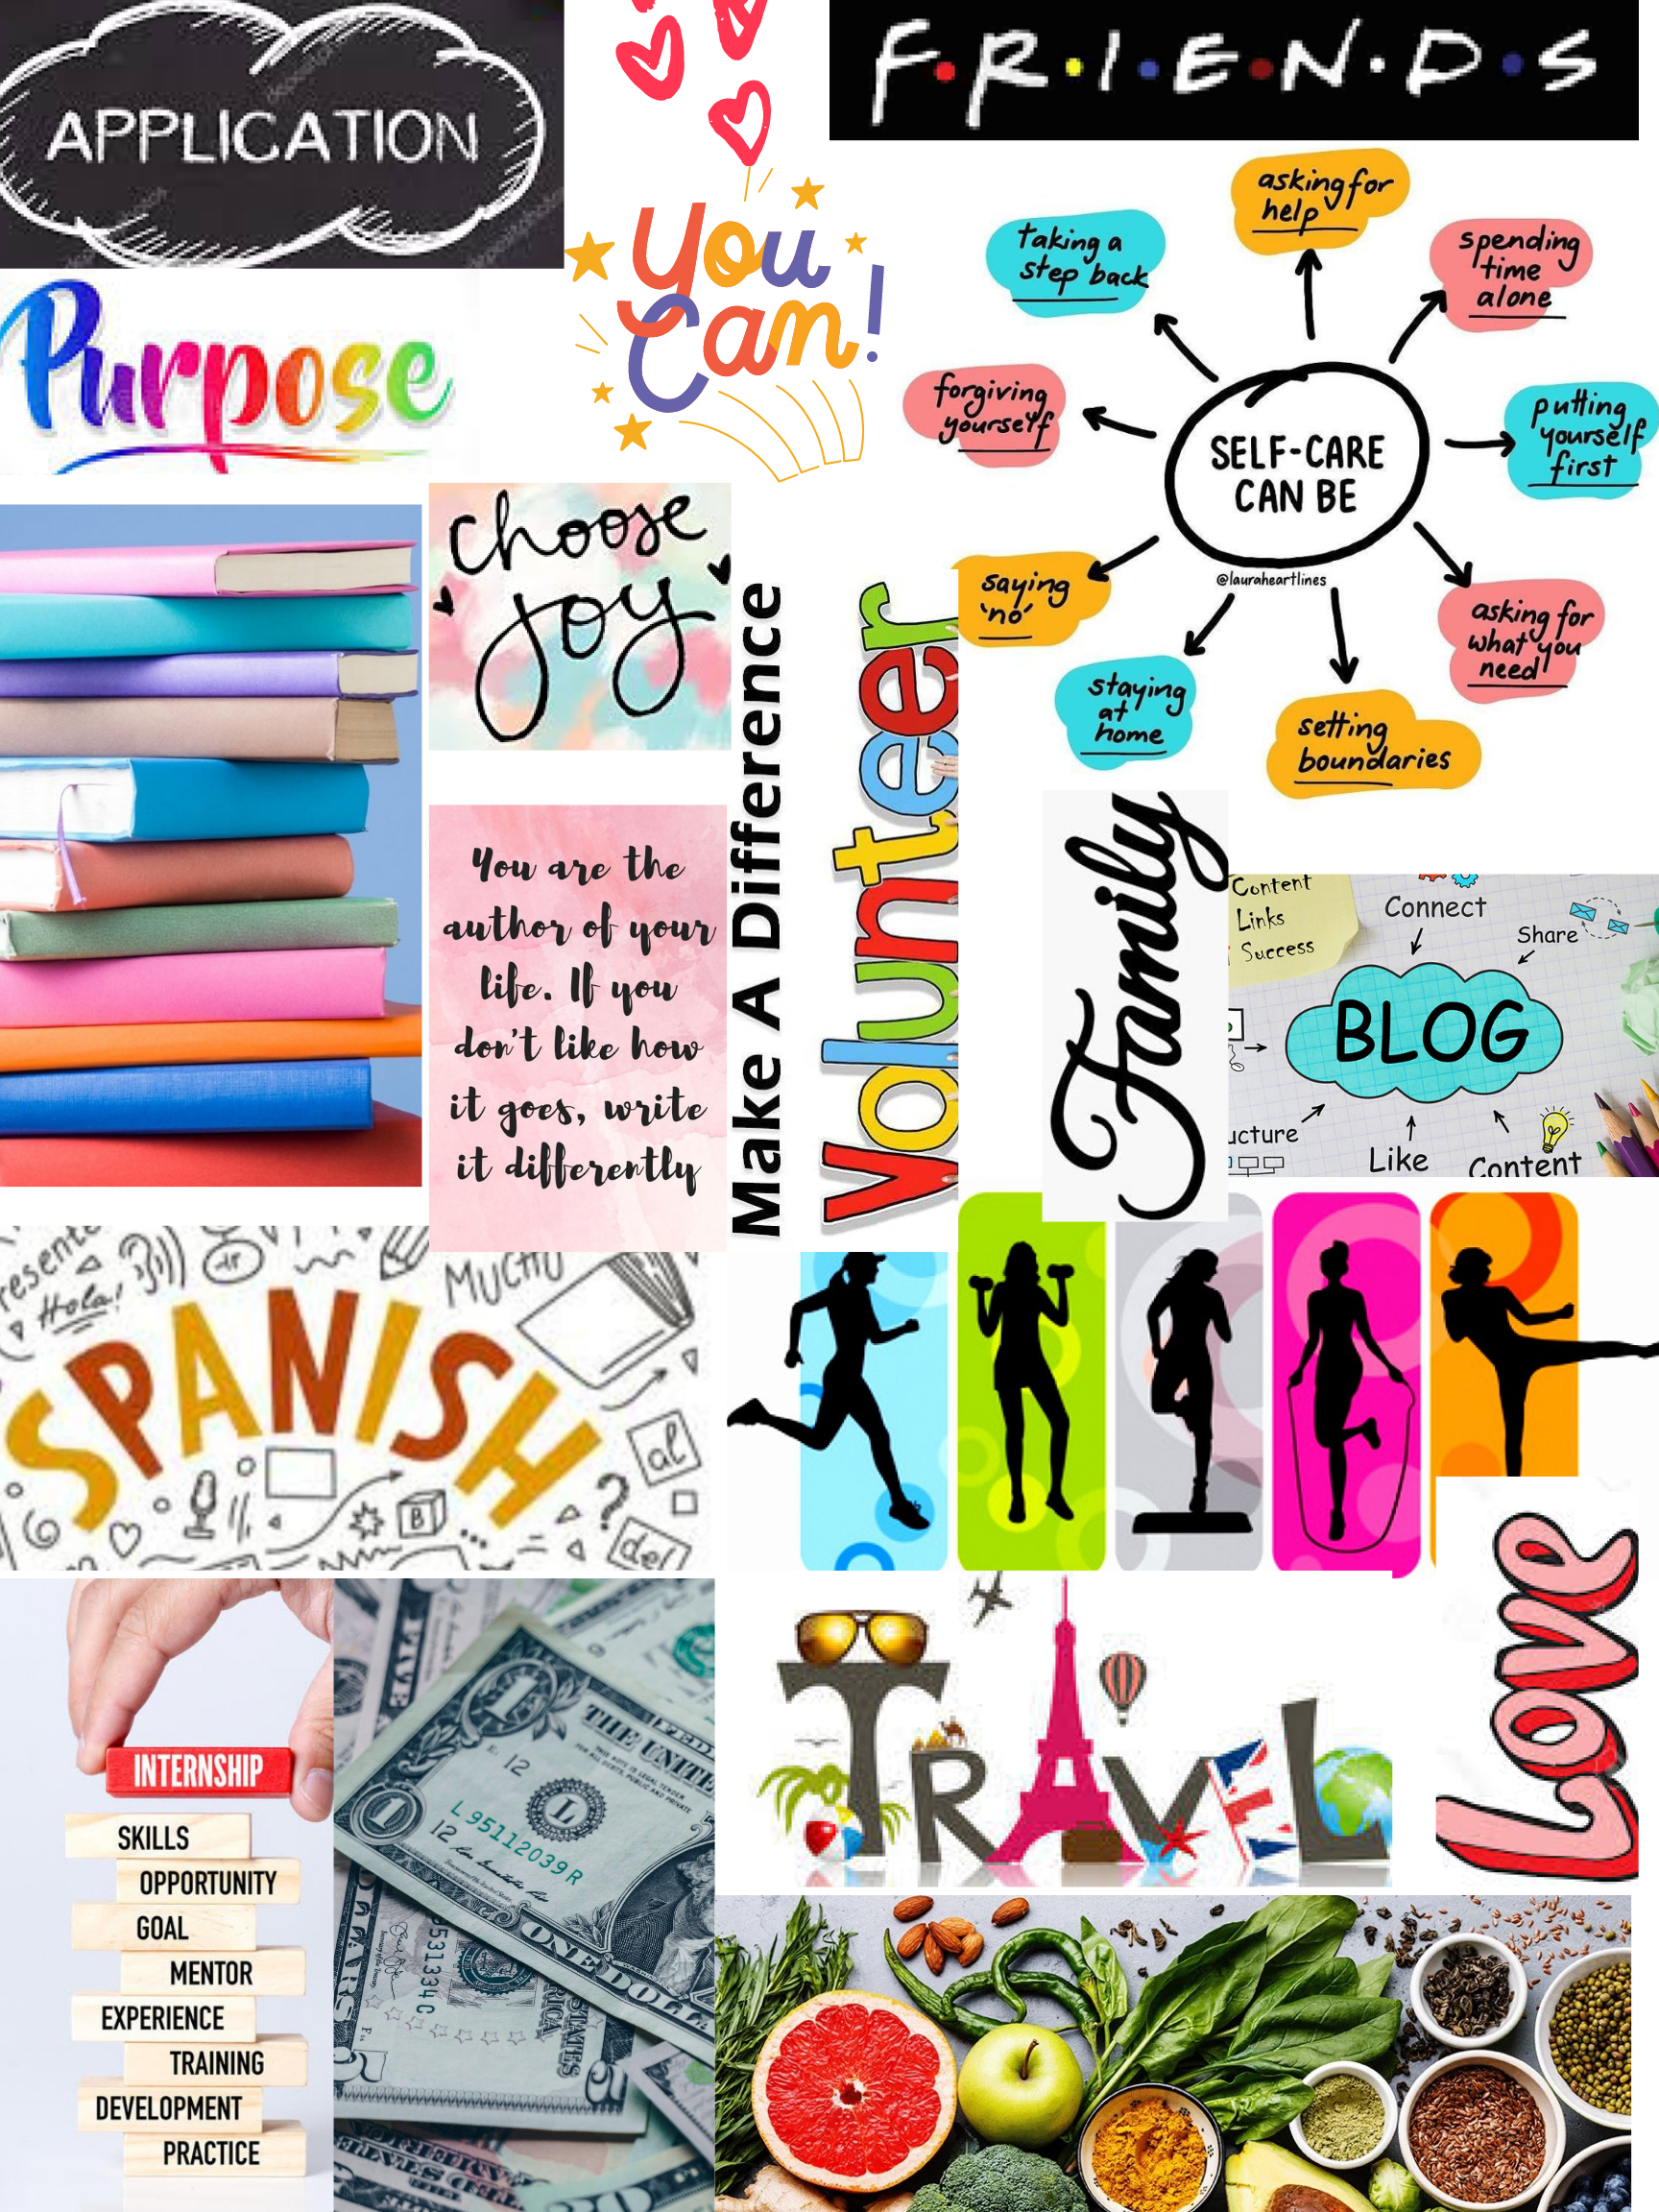 How to Make a Vision Board that Works + FREE Quotes  Making a vision board,  Vision board party, Vision board diy